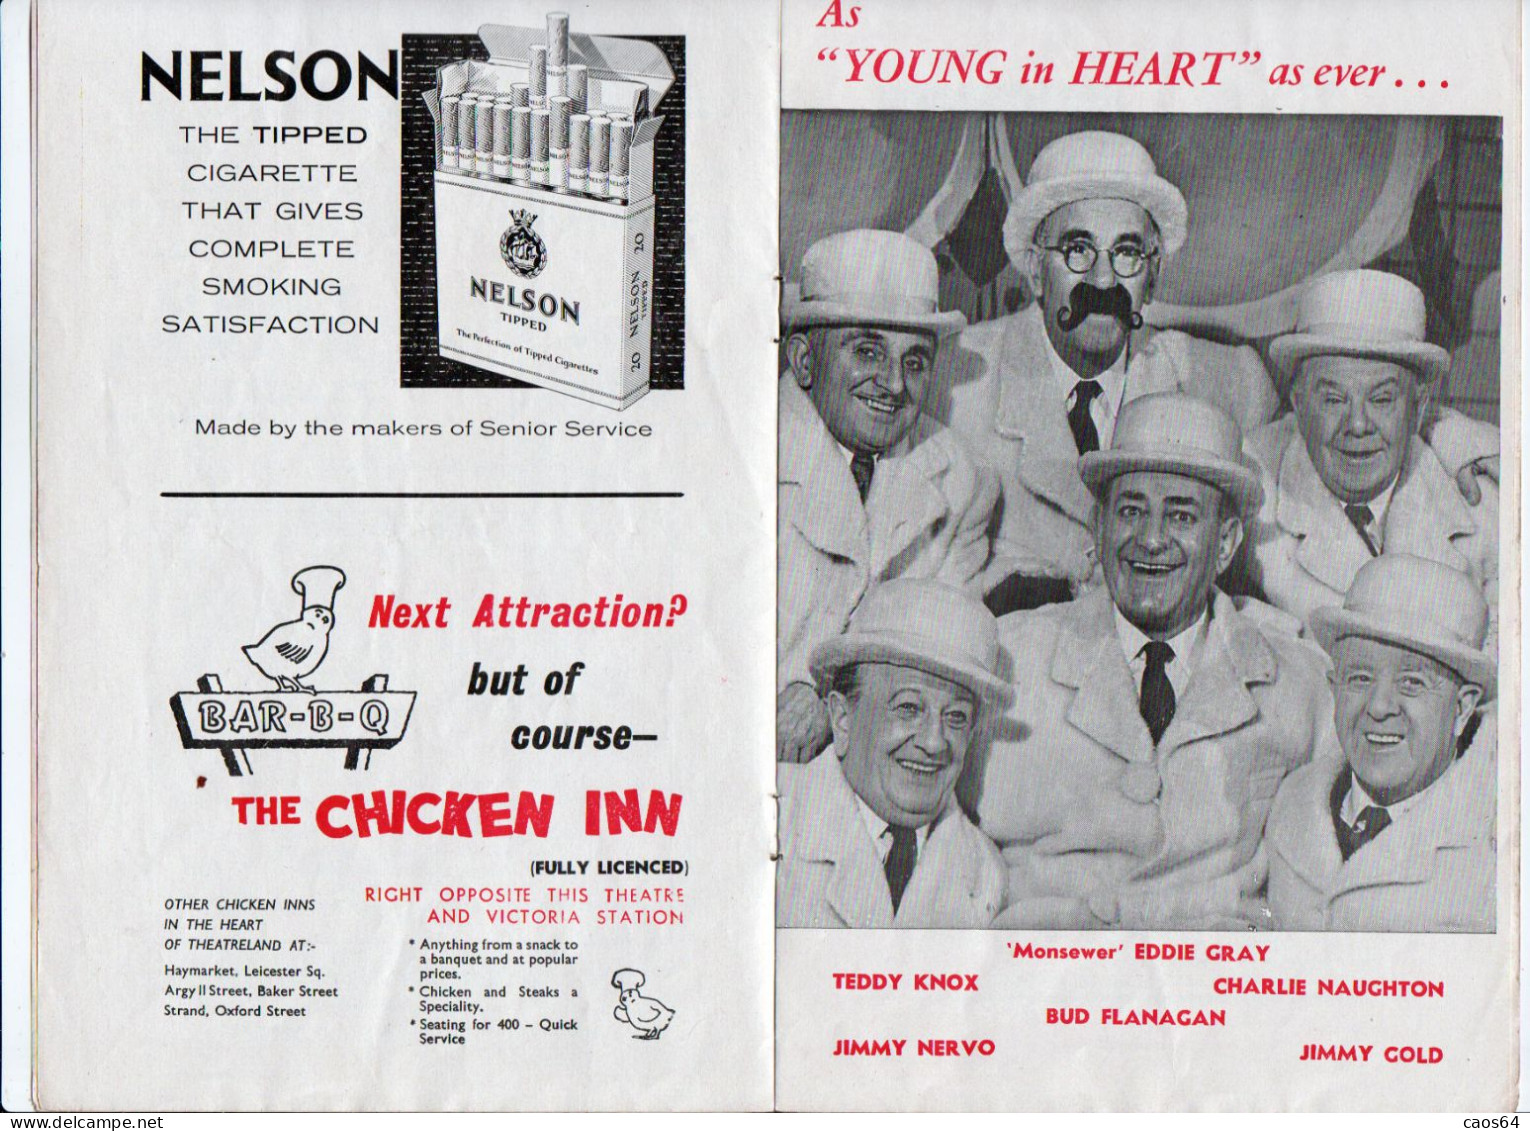 Brochure Victoria Palace Young In Heart Programme One Shilling 1960 - Programs